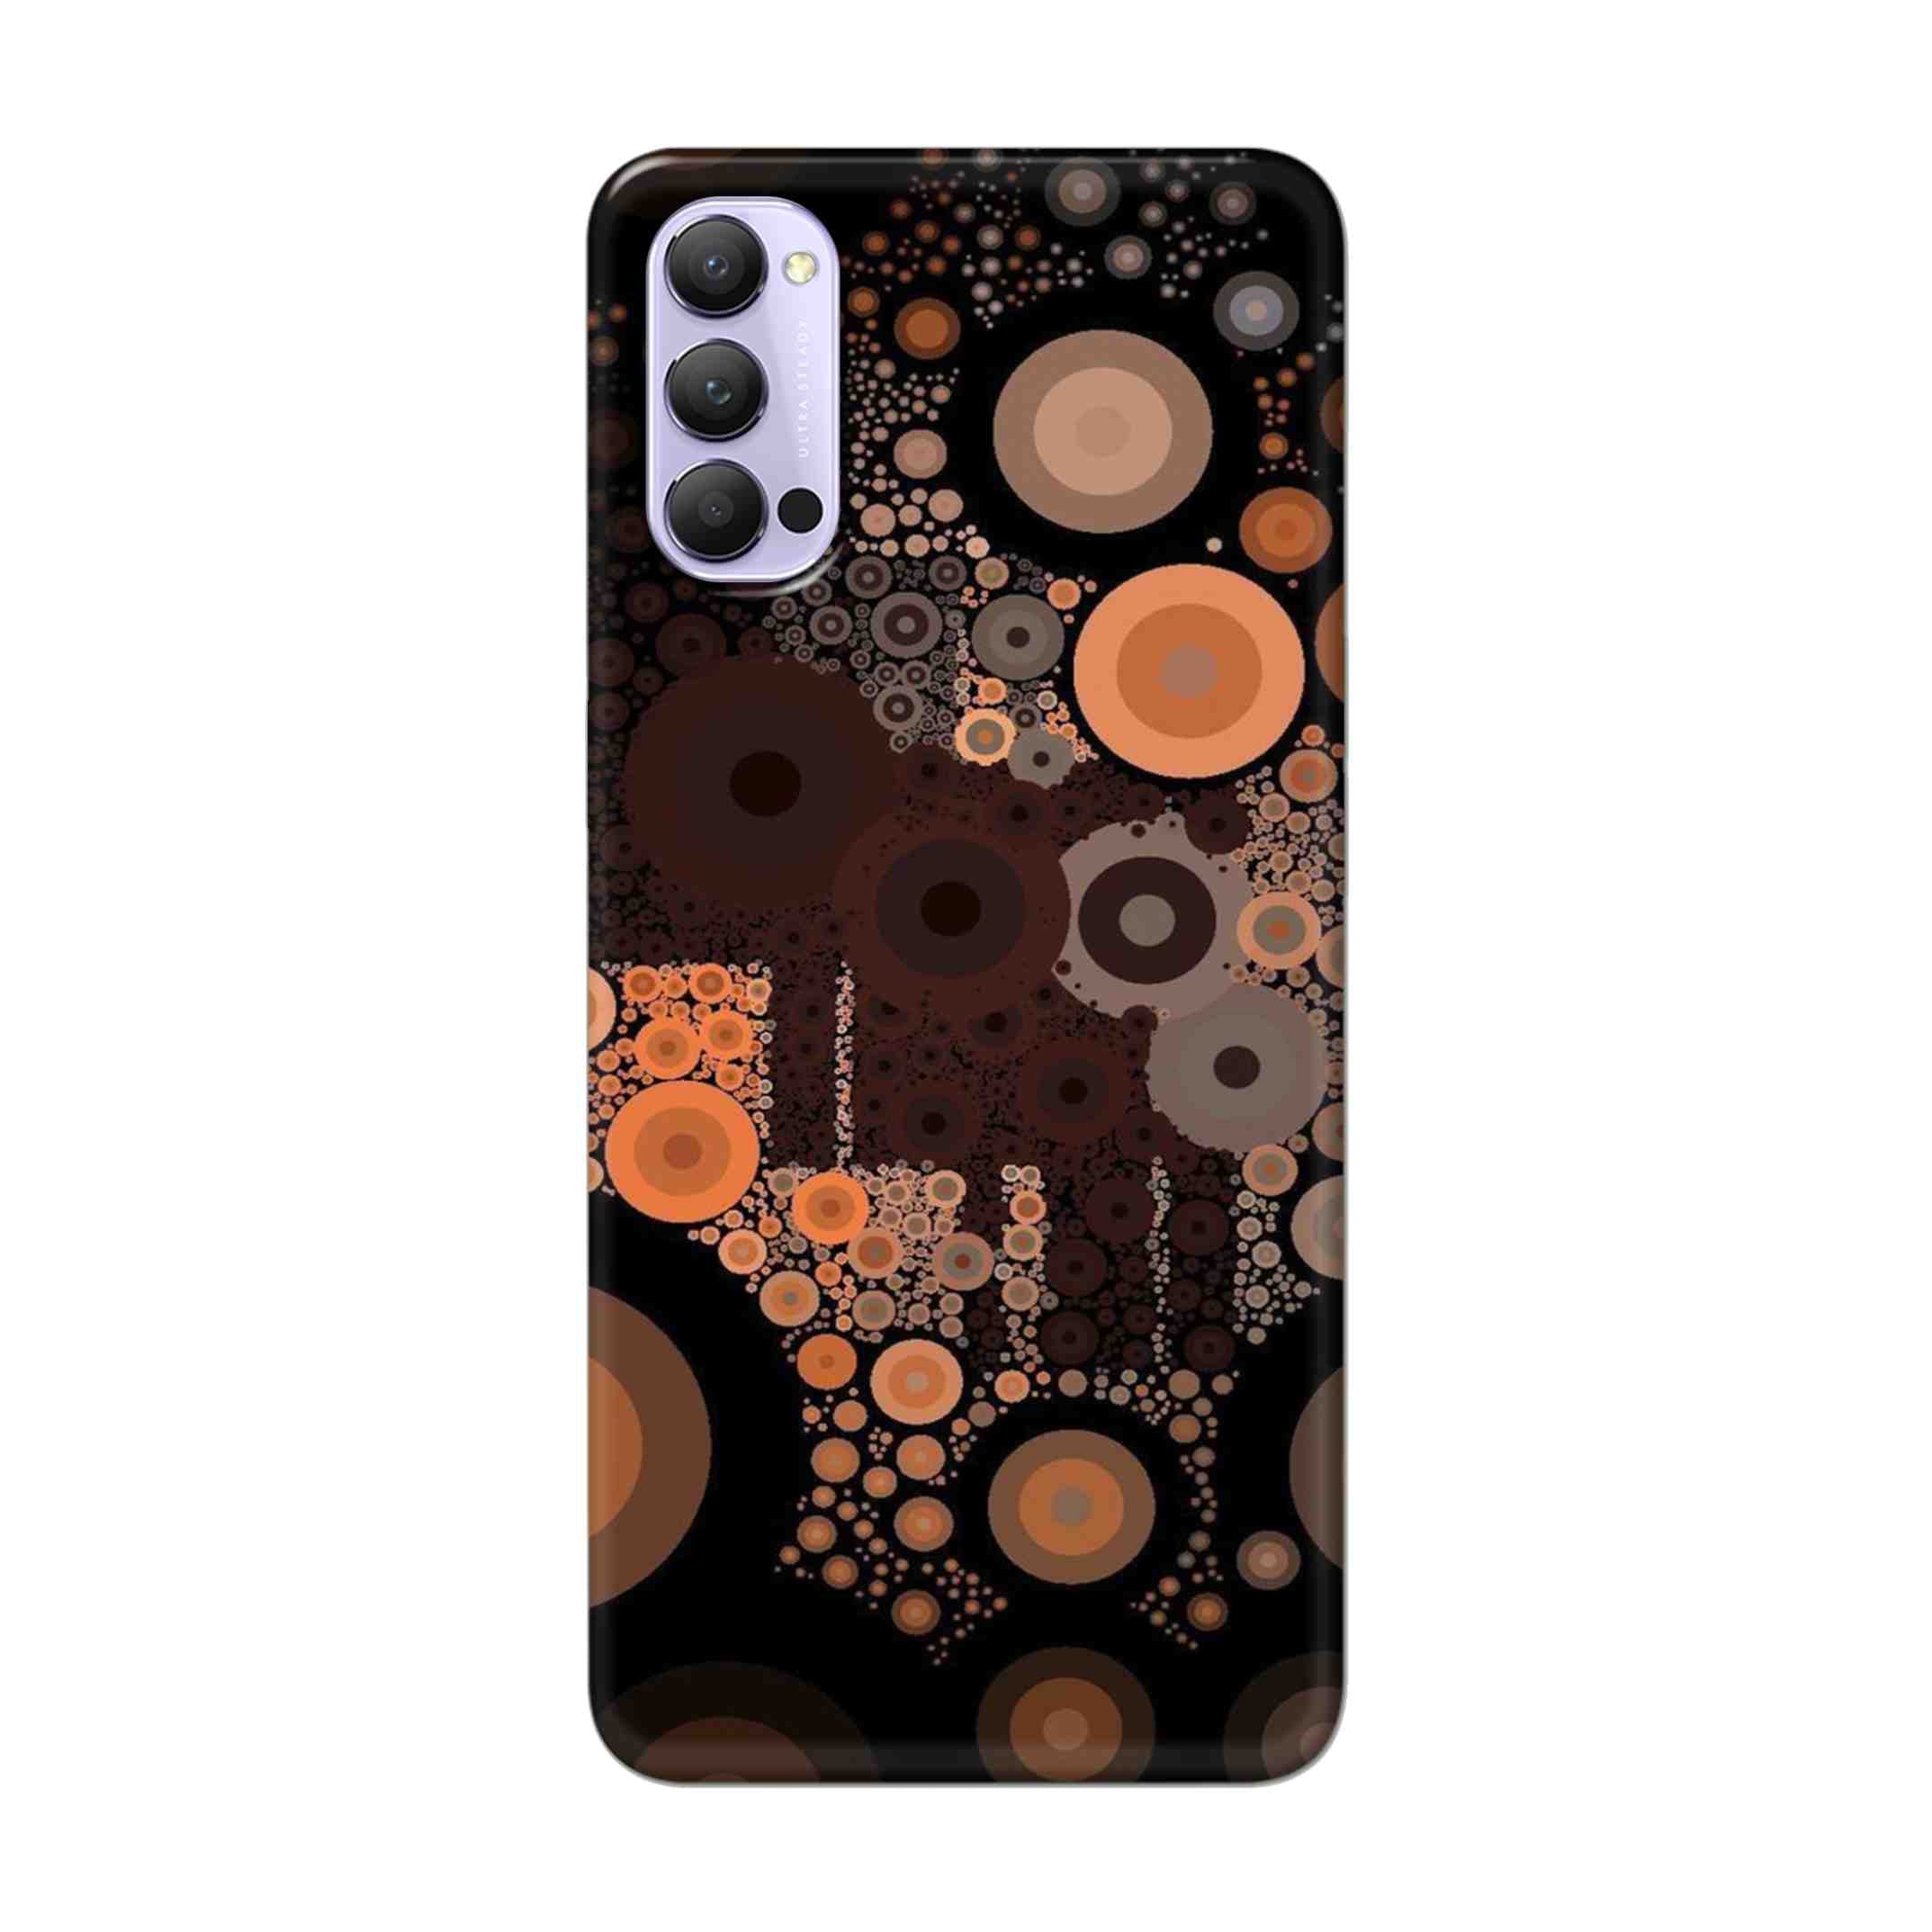 Buy Golden Circle Hard Back Mobile Phone Case Cover For Oppo Reno 4 Pro Online